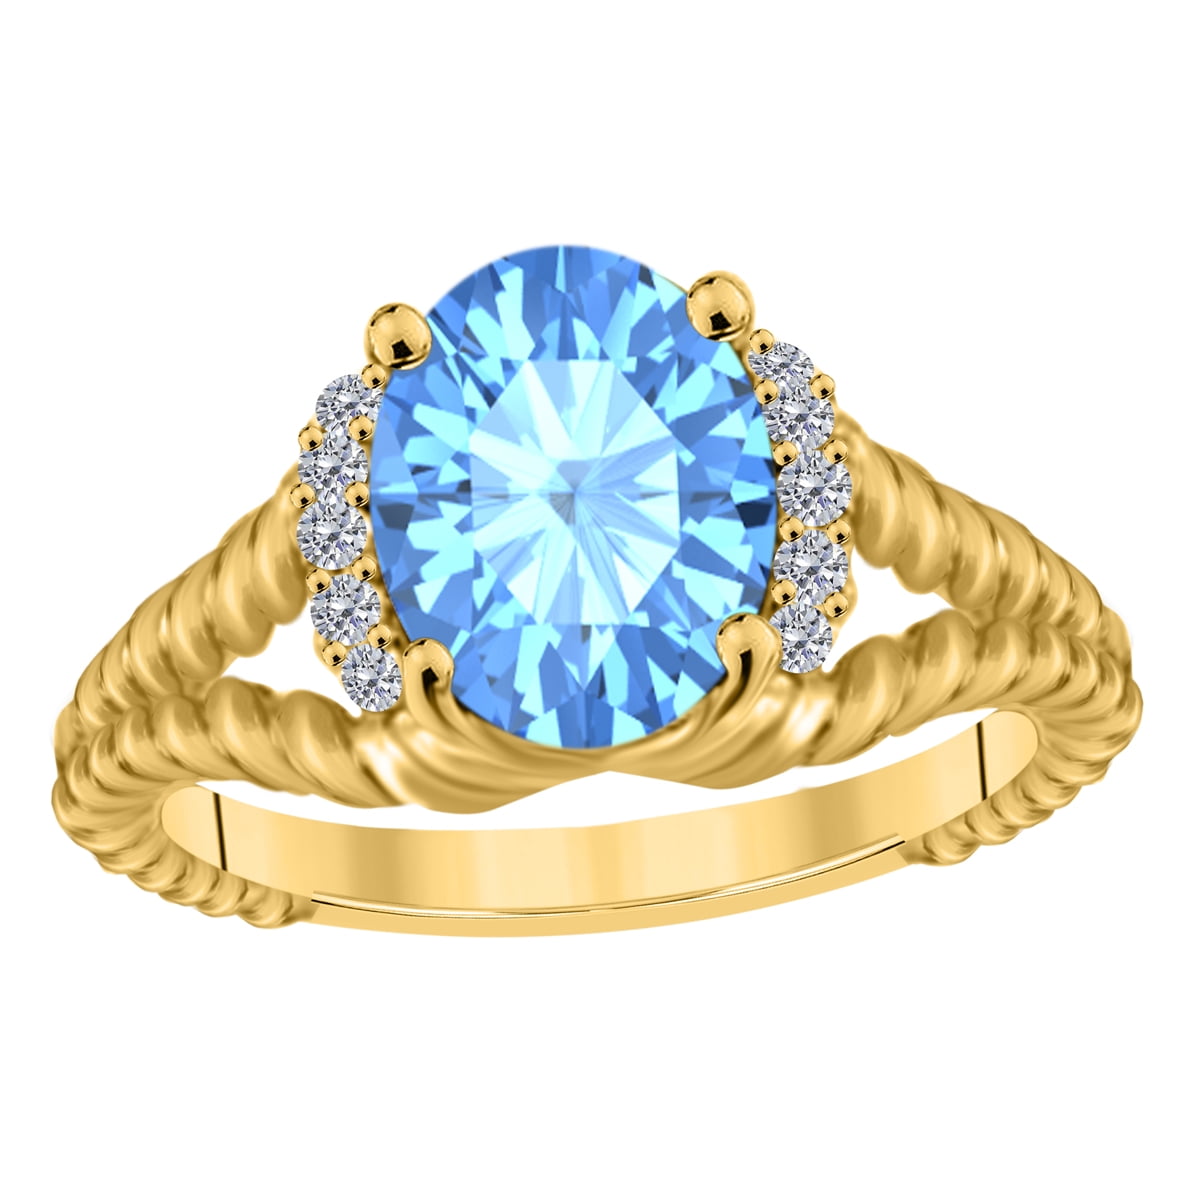 Shop London Blue Topaz Stackable Ring with Diamonds Accent Online